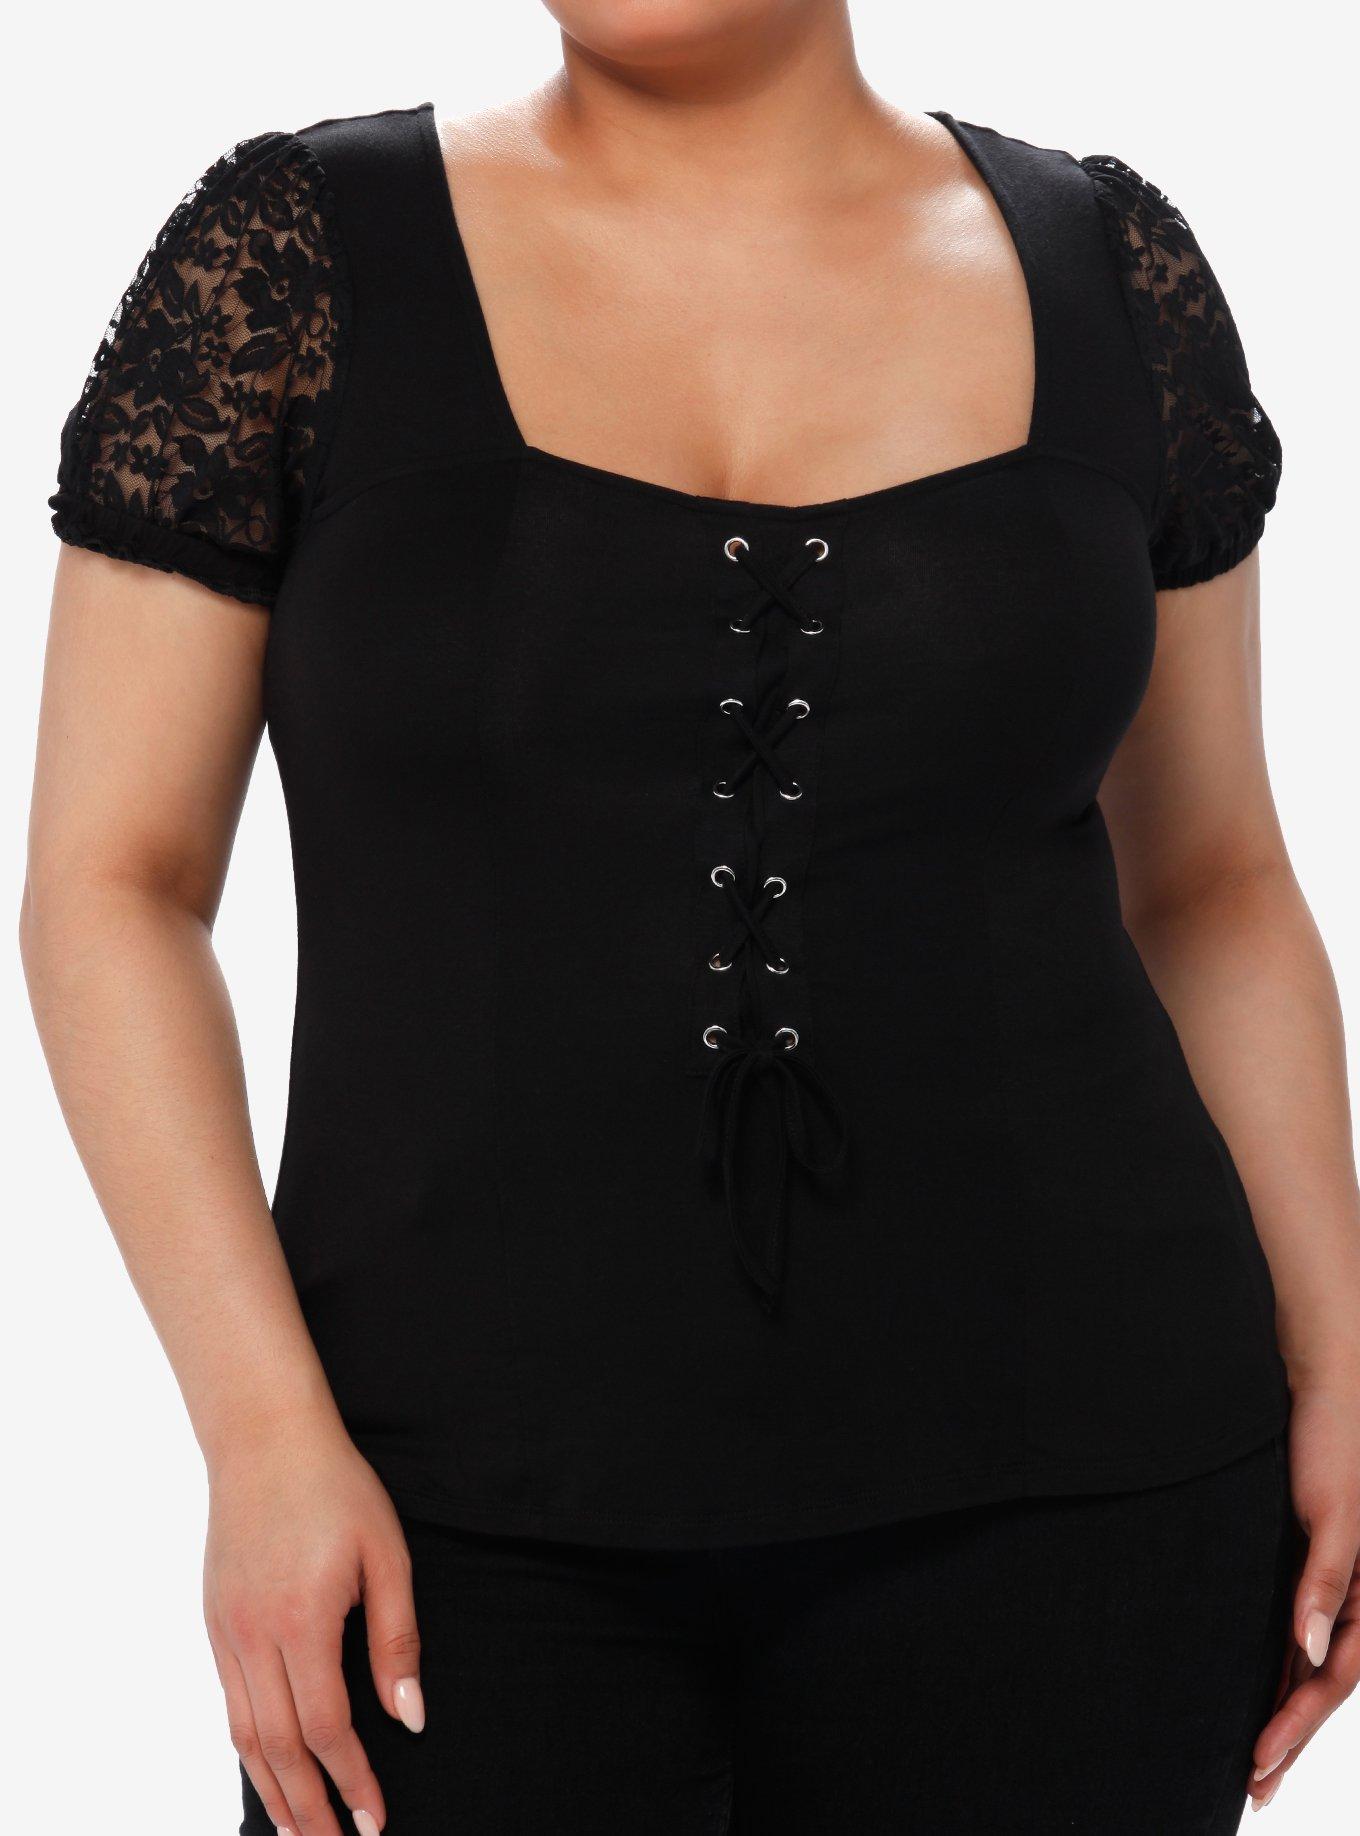 Cosmic Aura Black Lace-Up Girls Top Plus Size | Hot Topic